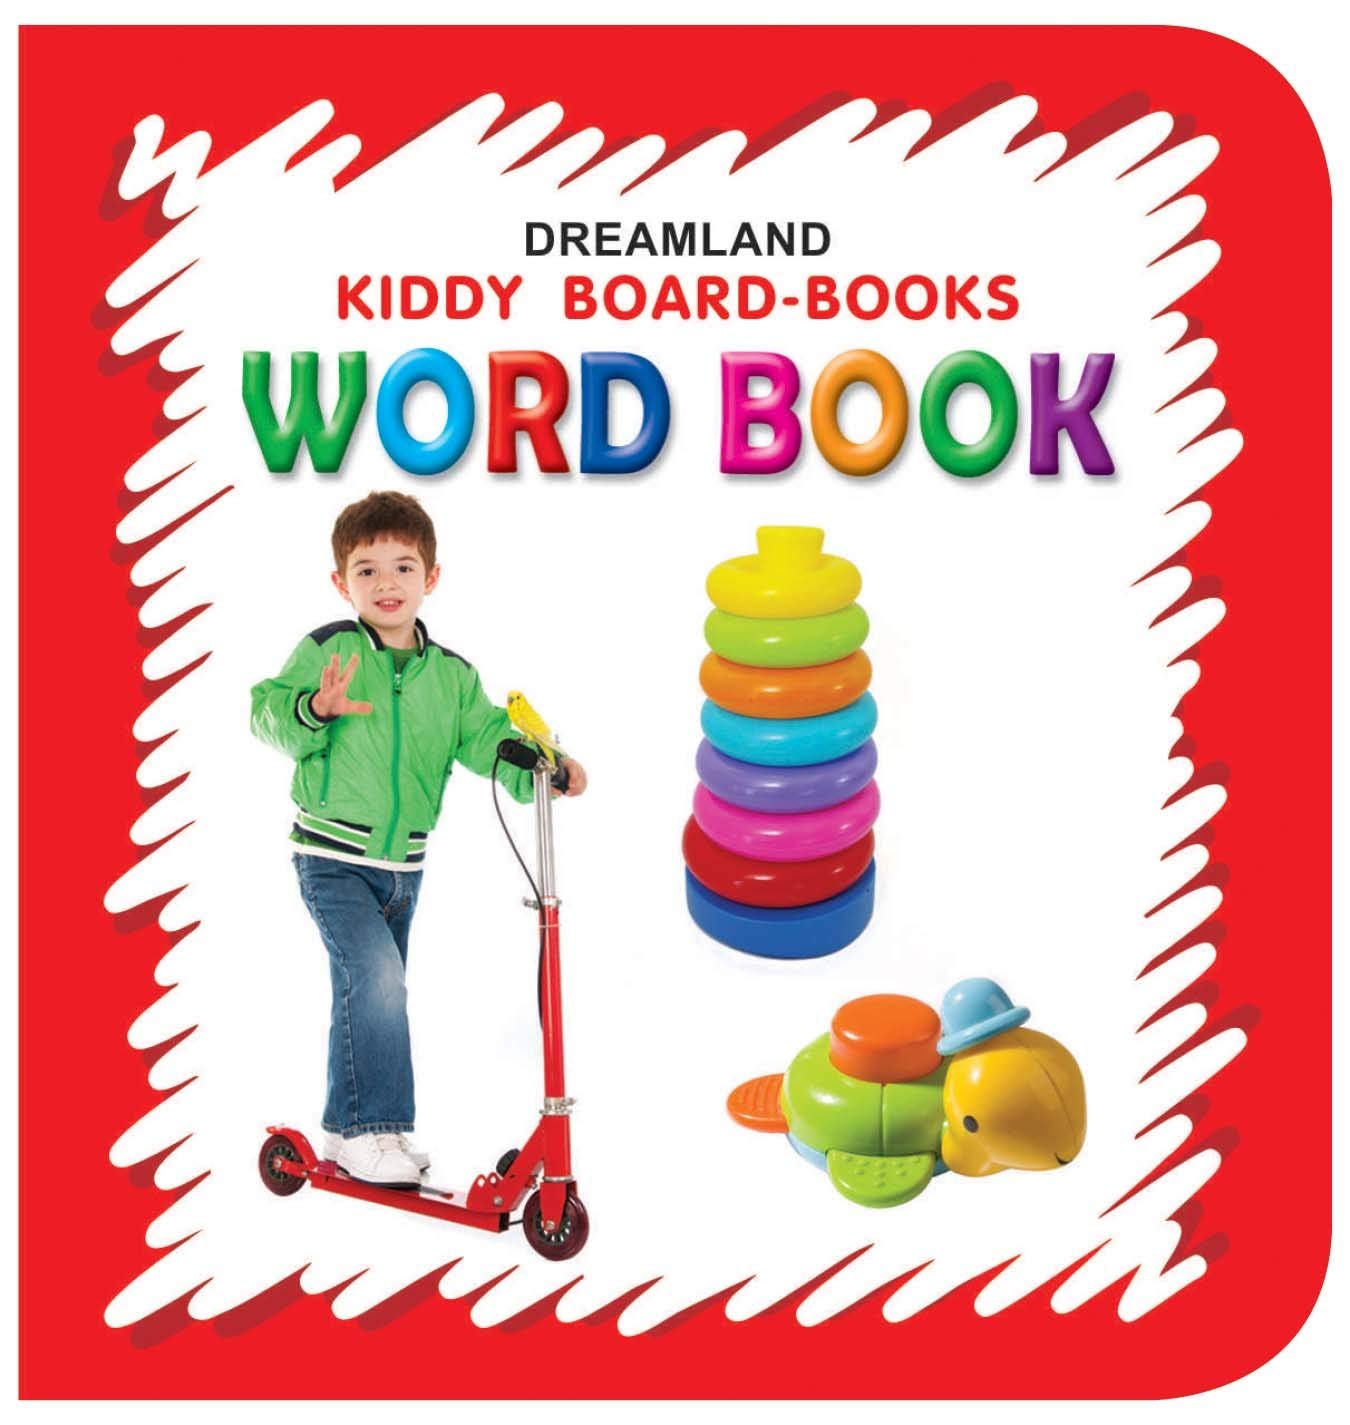 Word Board Book for Children Age 0 -2 Years